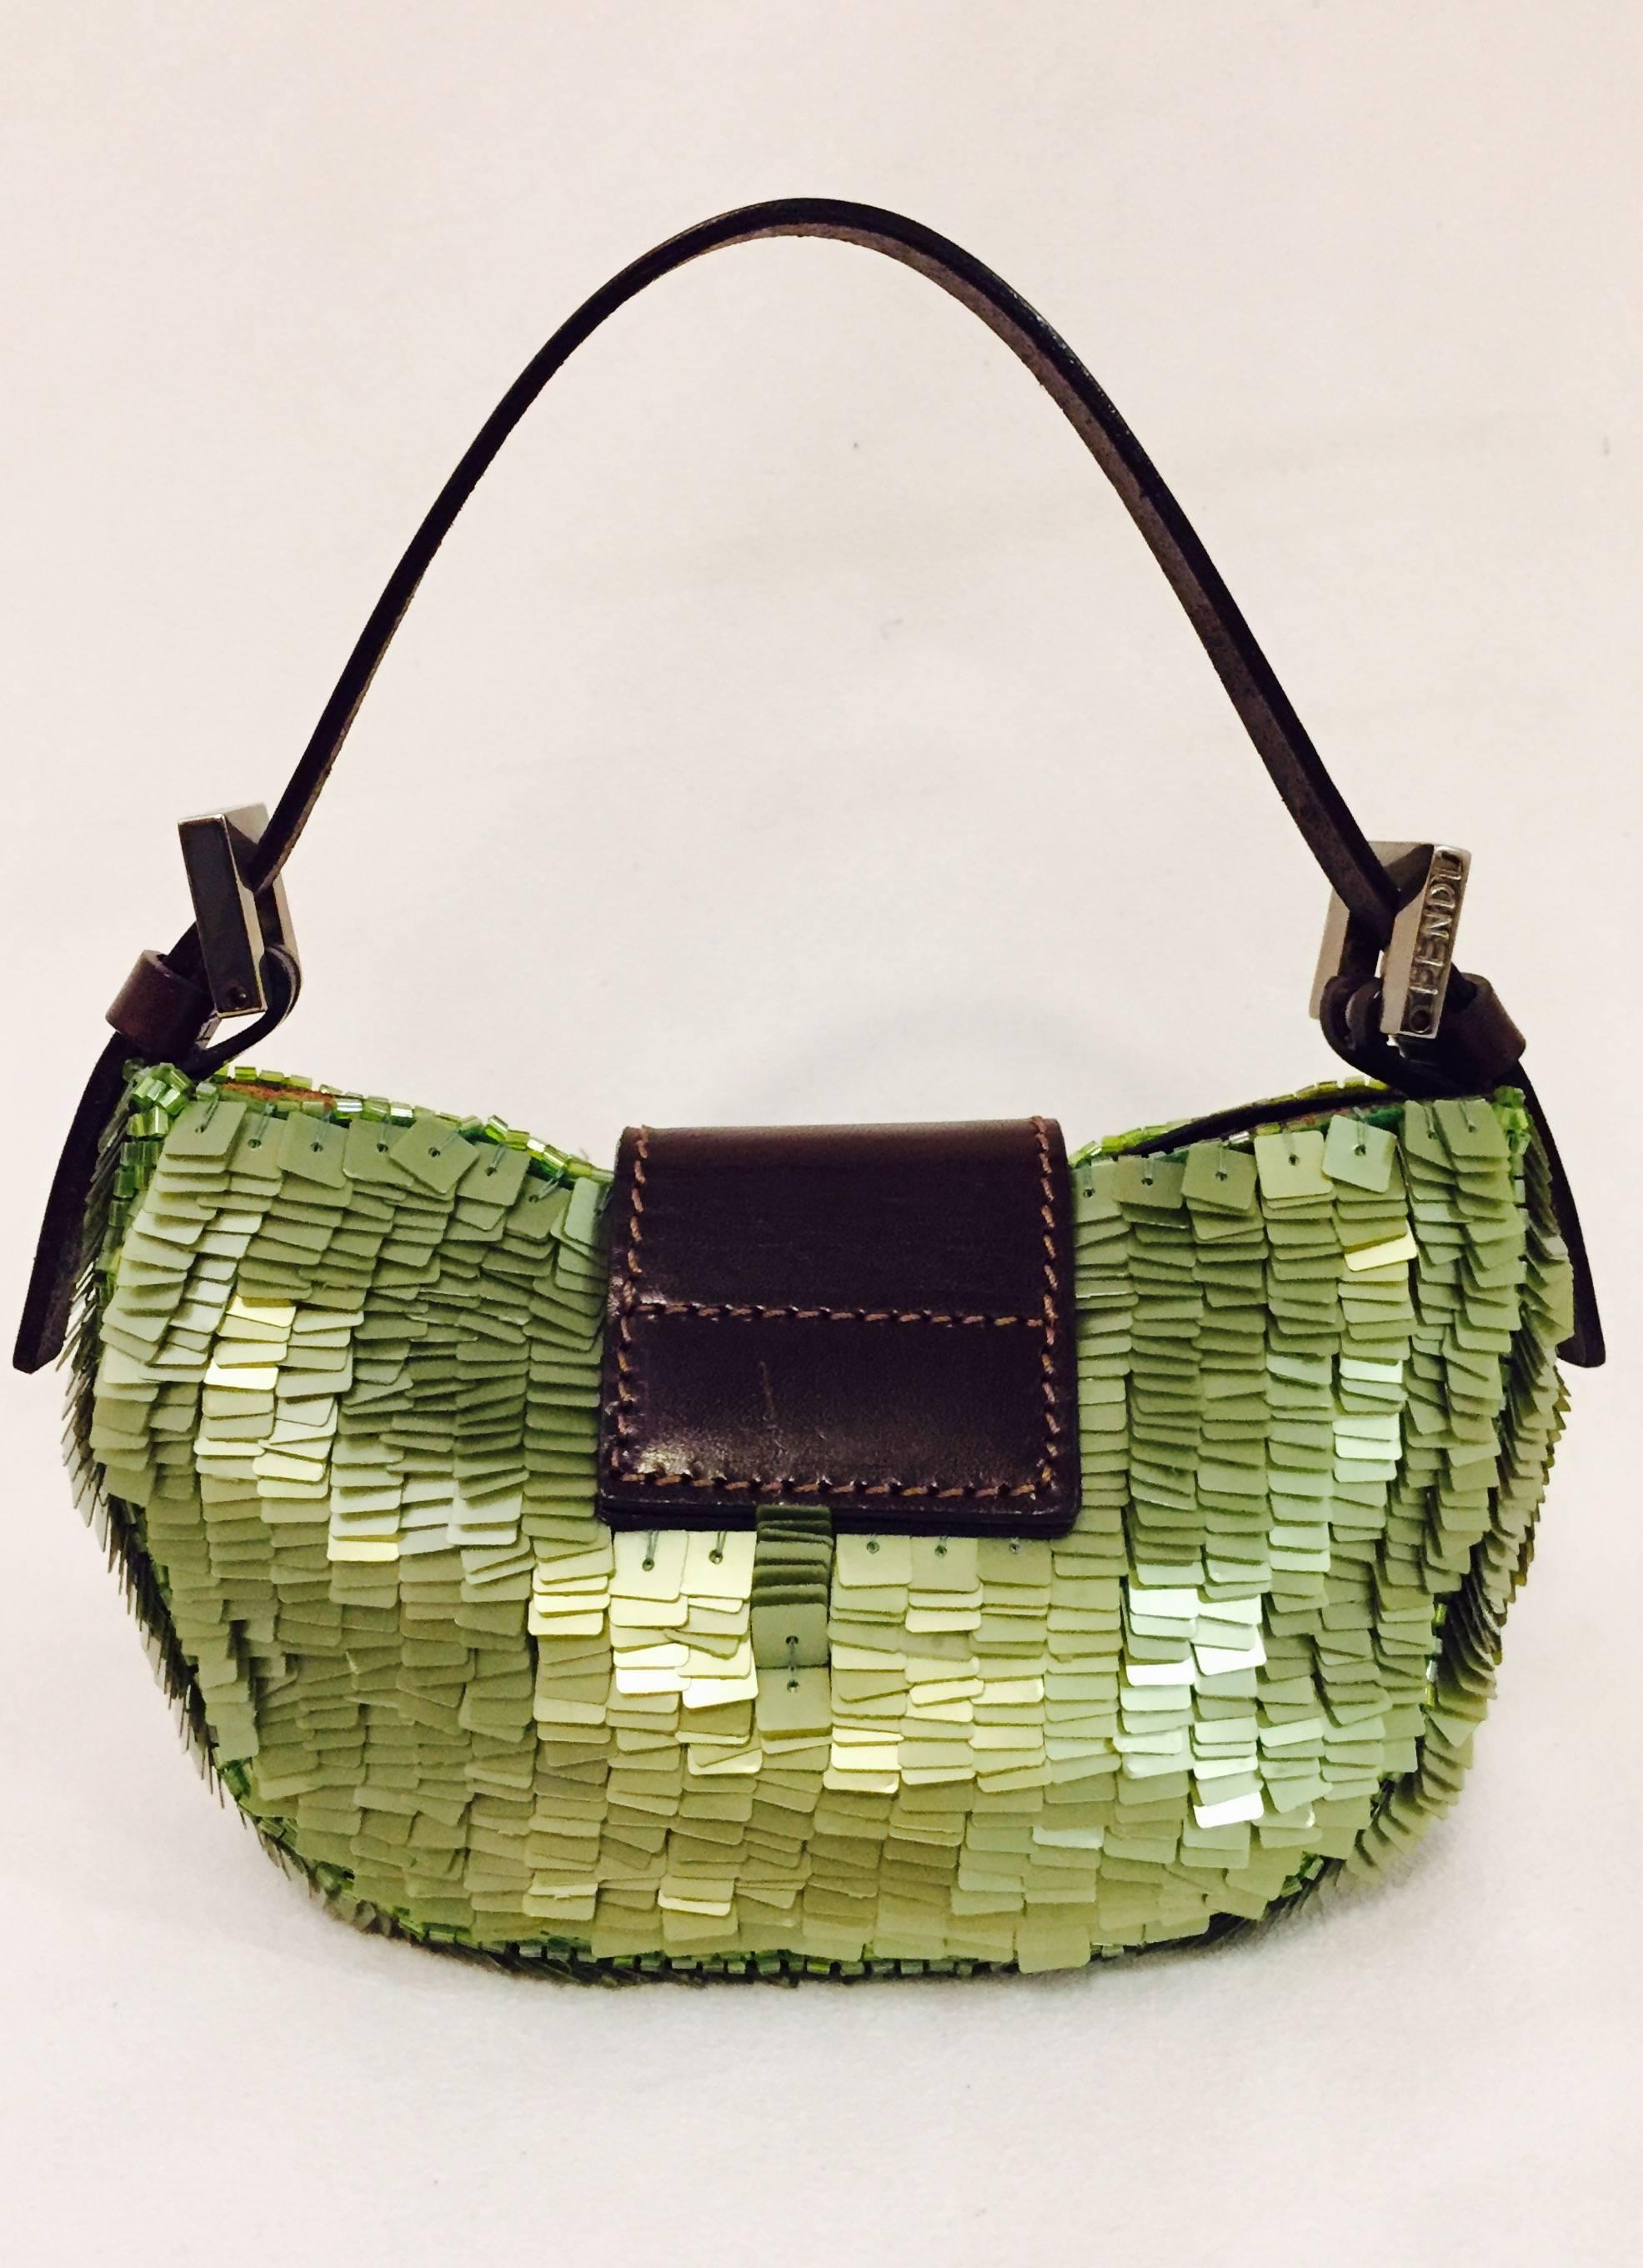 Bright green sequined/paillete croissant mini bag is finely crafted in the Fendi tradition featuring its unmistakable namesake shape that's good enough to eat!  Brown leather top handle, strap and iconic logo.  Silver tone hardware and magnetic snap